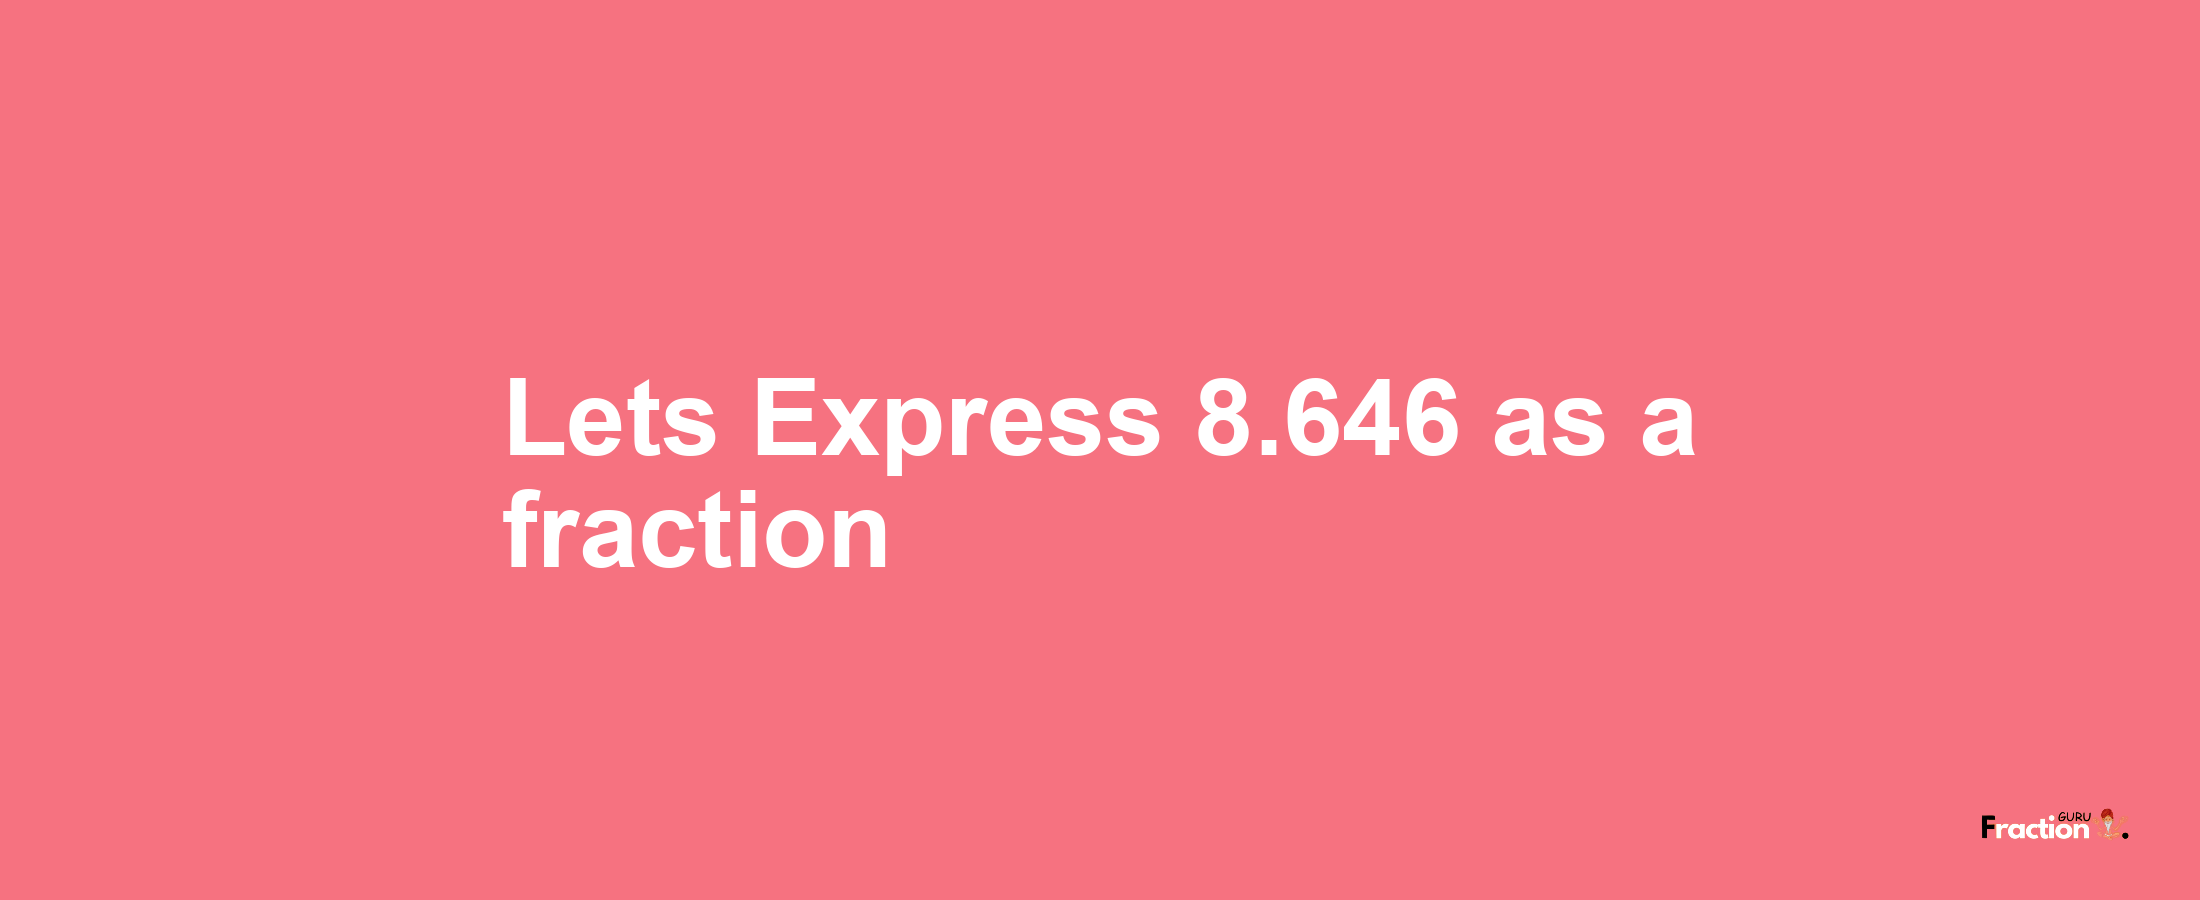 Lets Express 8.646 as afraction